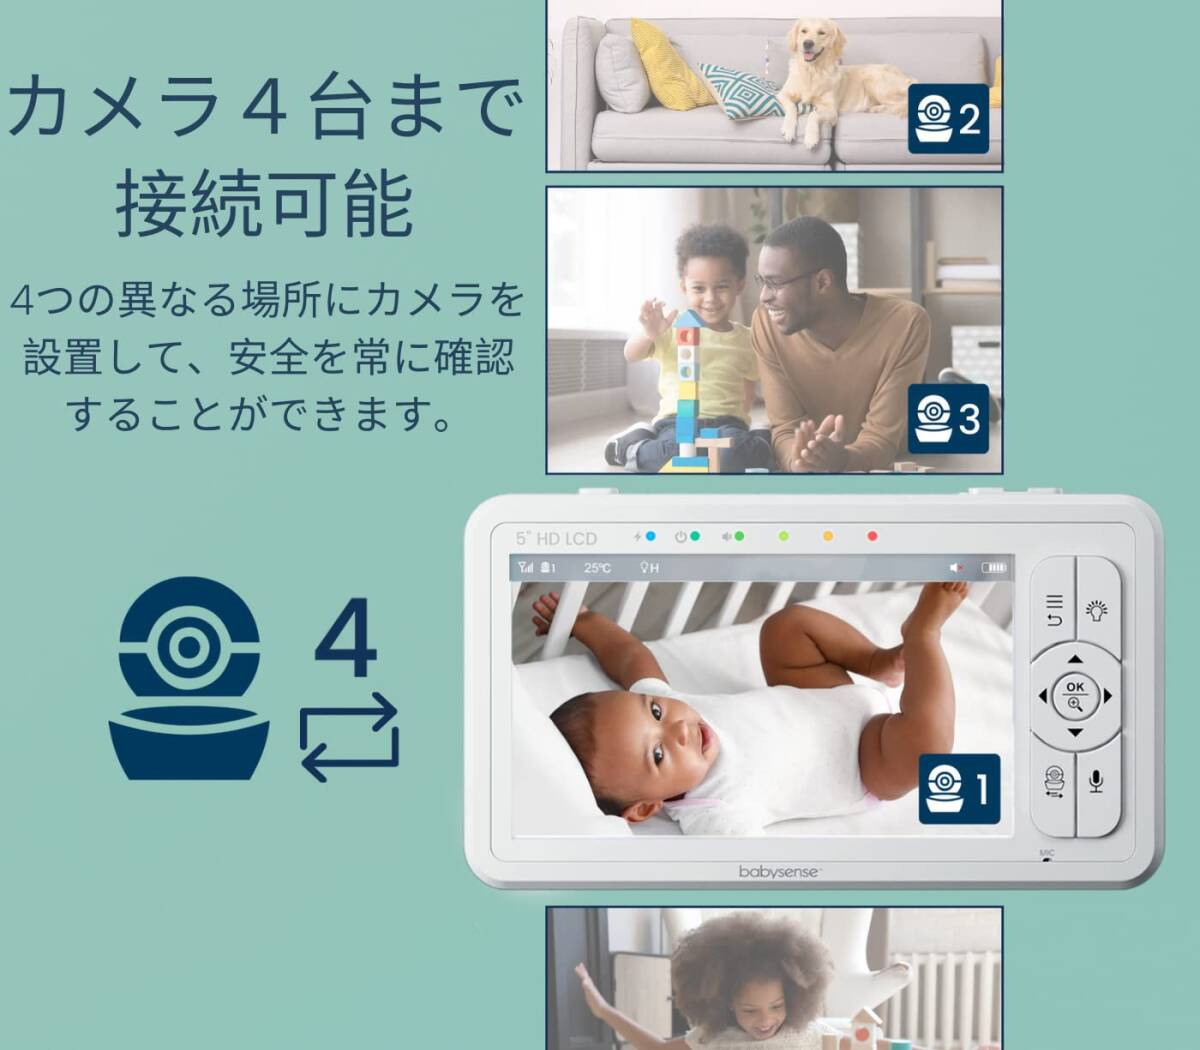 *HD image quality baby camera see protection camera baby monitor debut! user popularity length 